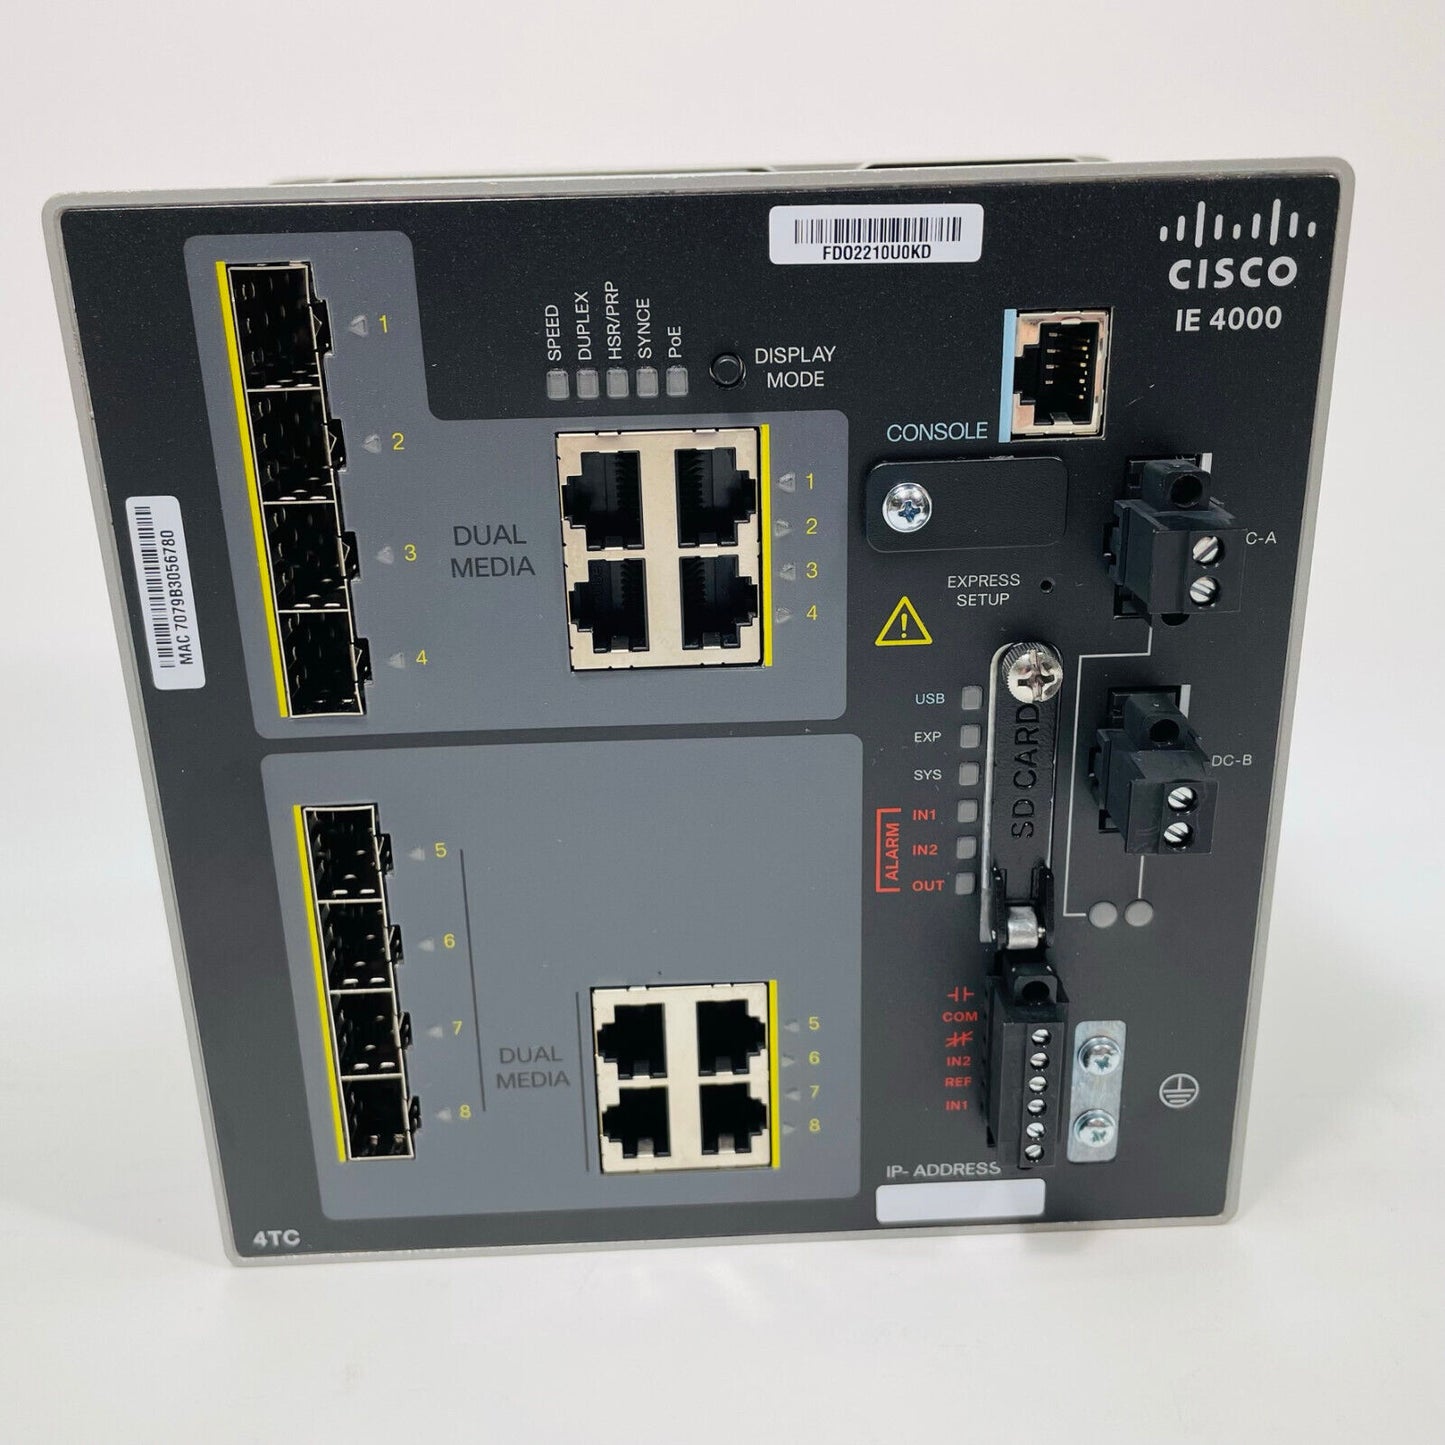 New Cisco IE-4000-4TC4G-E 4-Port FE & 4-Port GE Combo Industrial Ethernet Switch